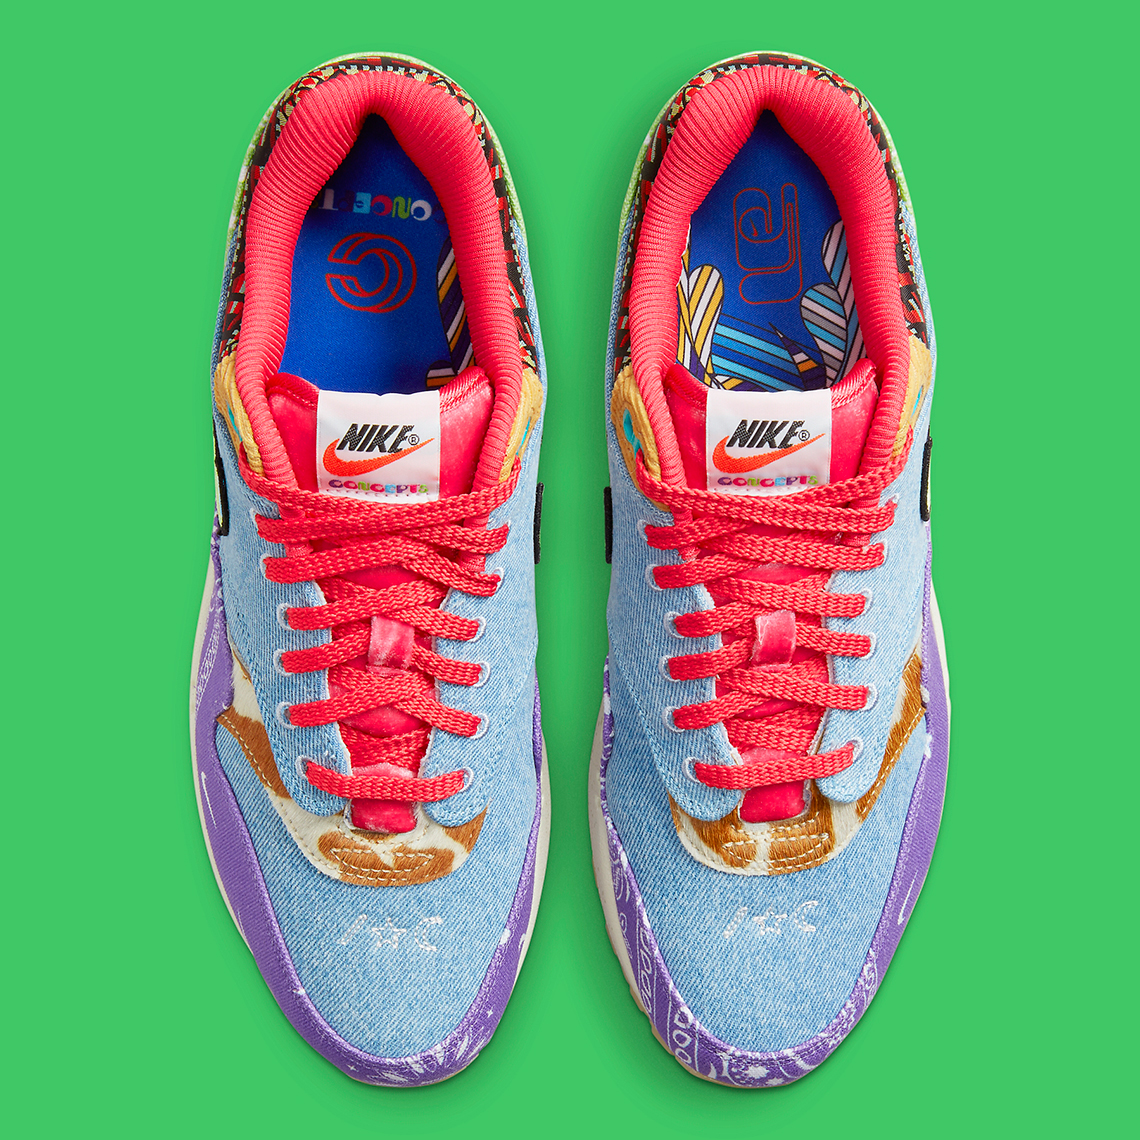 Canvas Patta X Nike Air Max 1 Concept By Evange, snekers